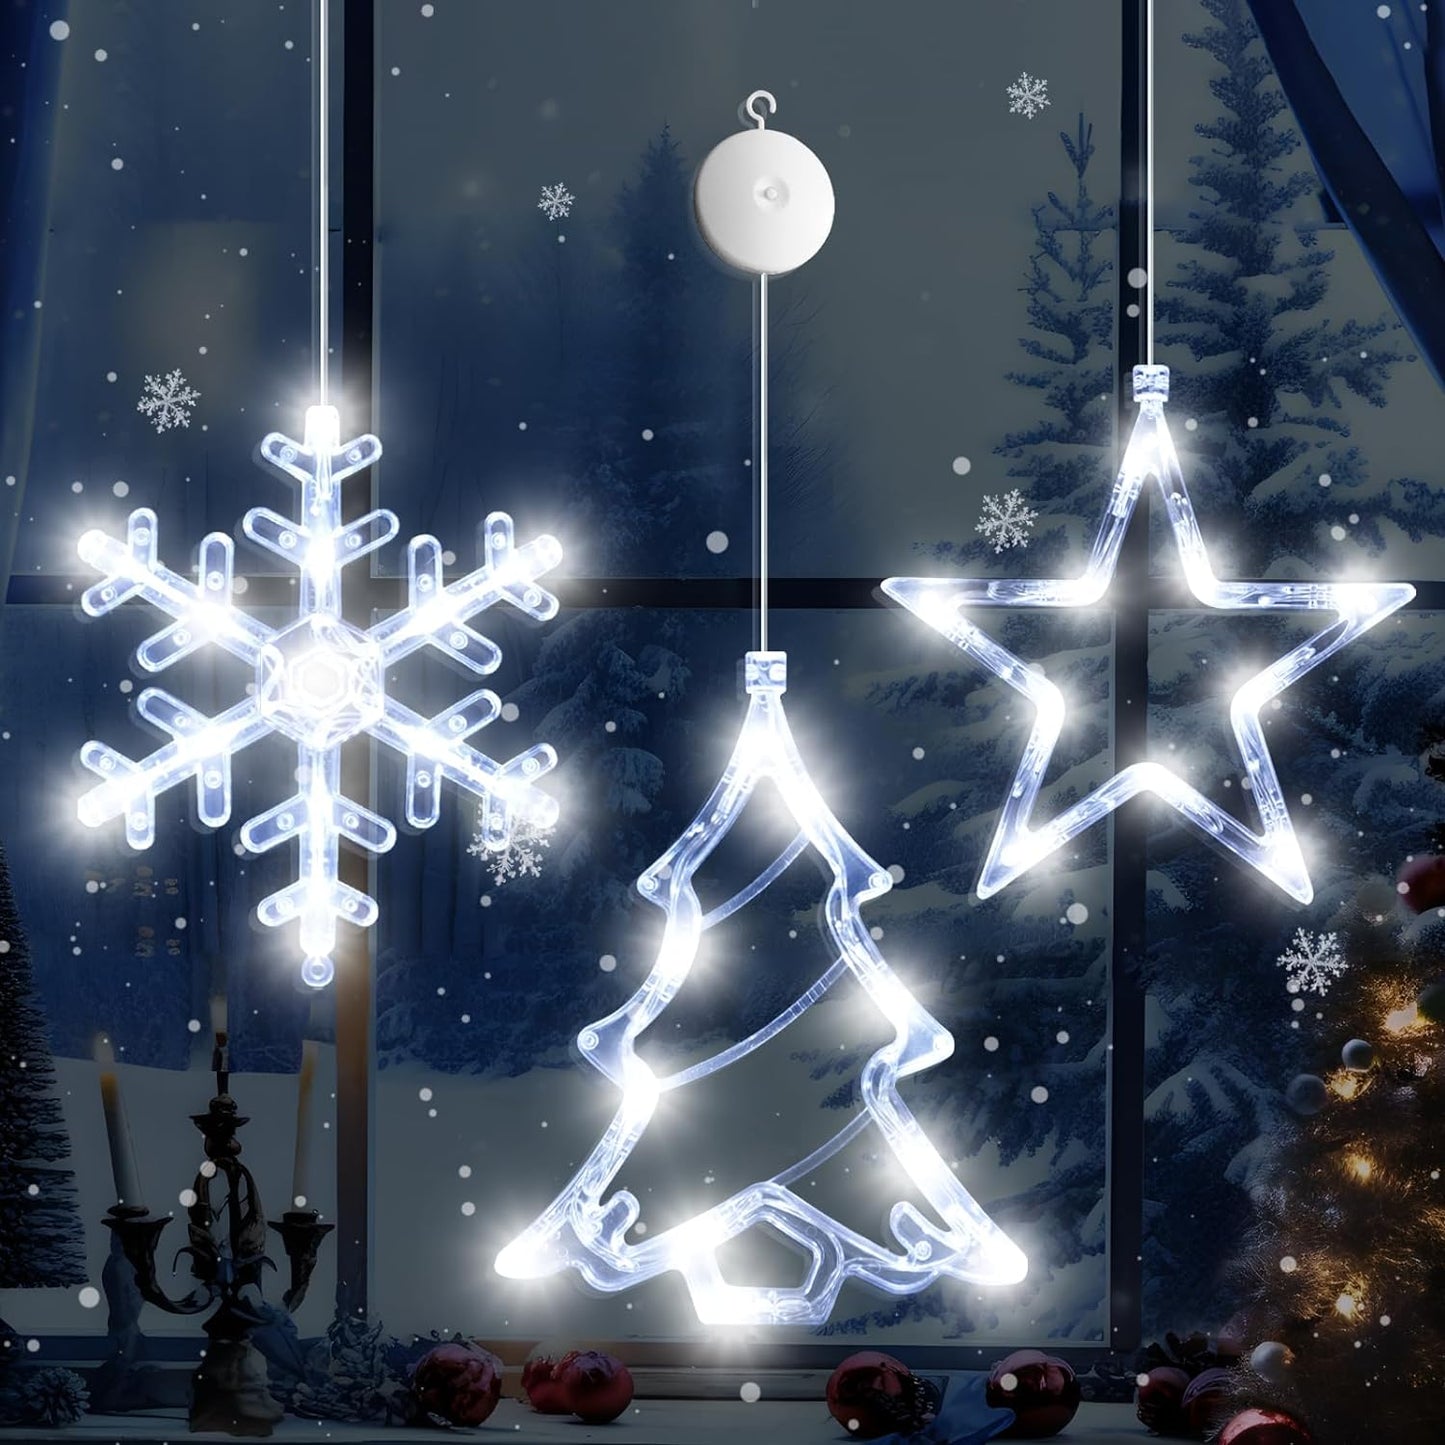 LYUBASA 3Pcs Battery-Powered Christmas Window Lights Decorations: White Lighted Snowflake, Tree, and Star Shaped LED Sucker Lamps for Indoor and Outdoor Holiday Decor